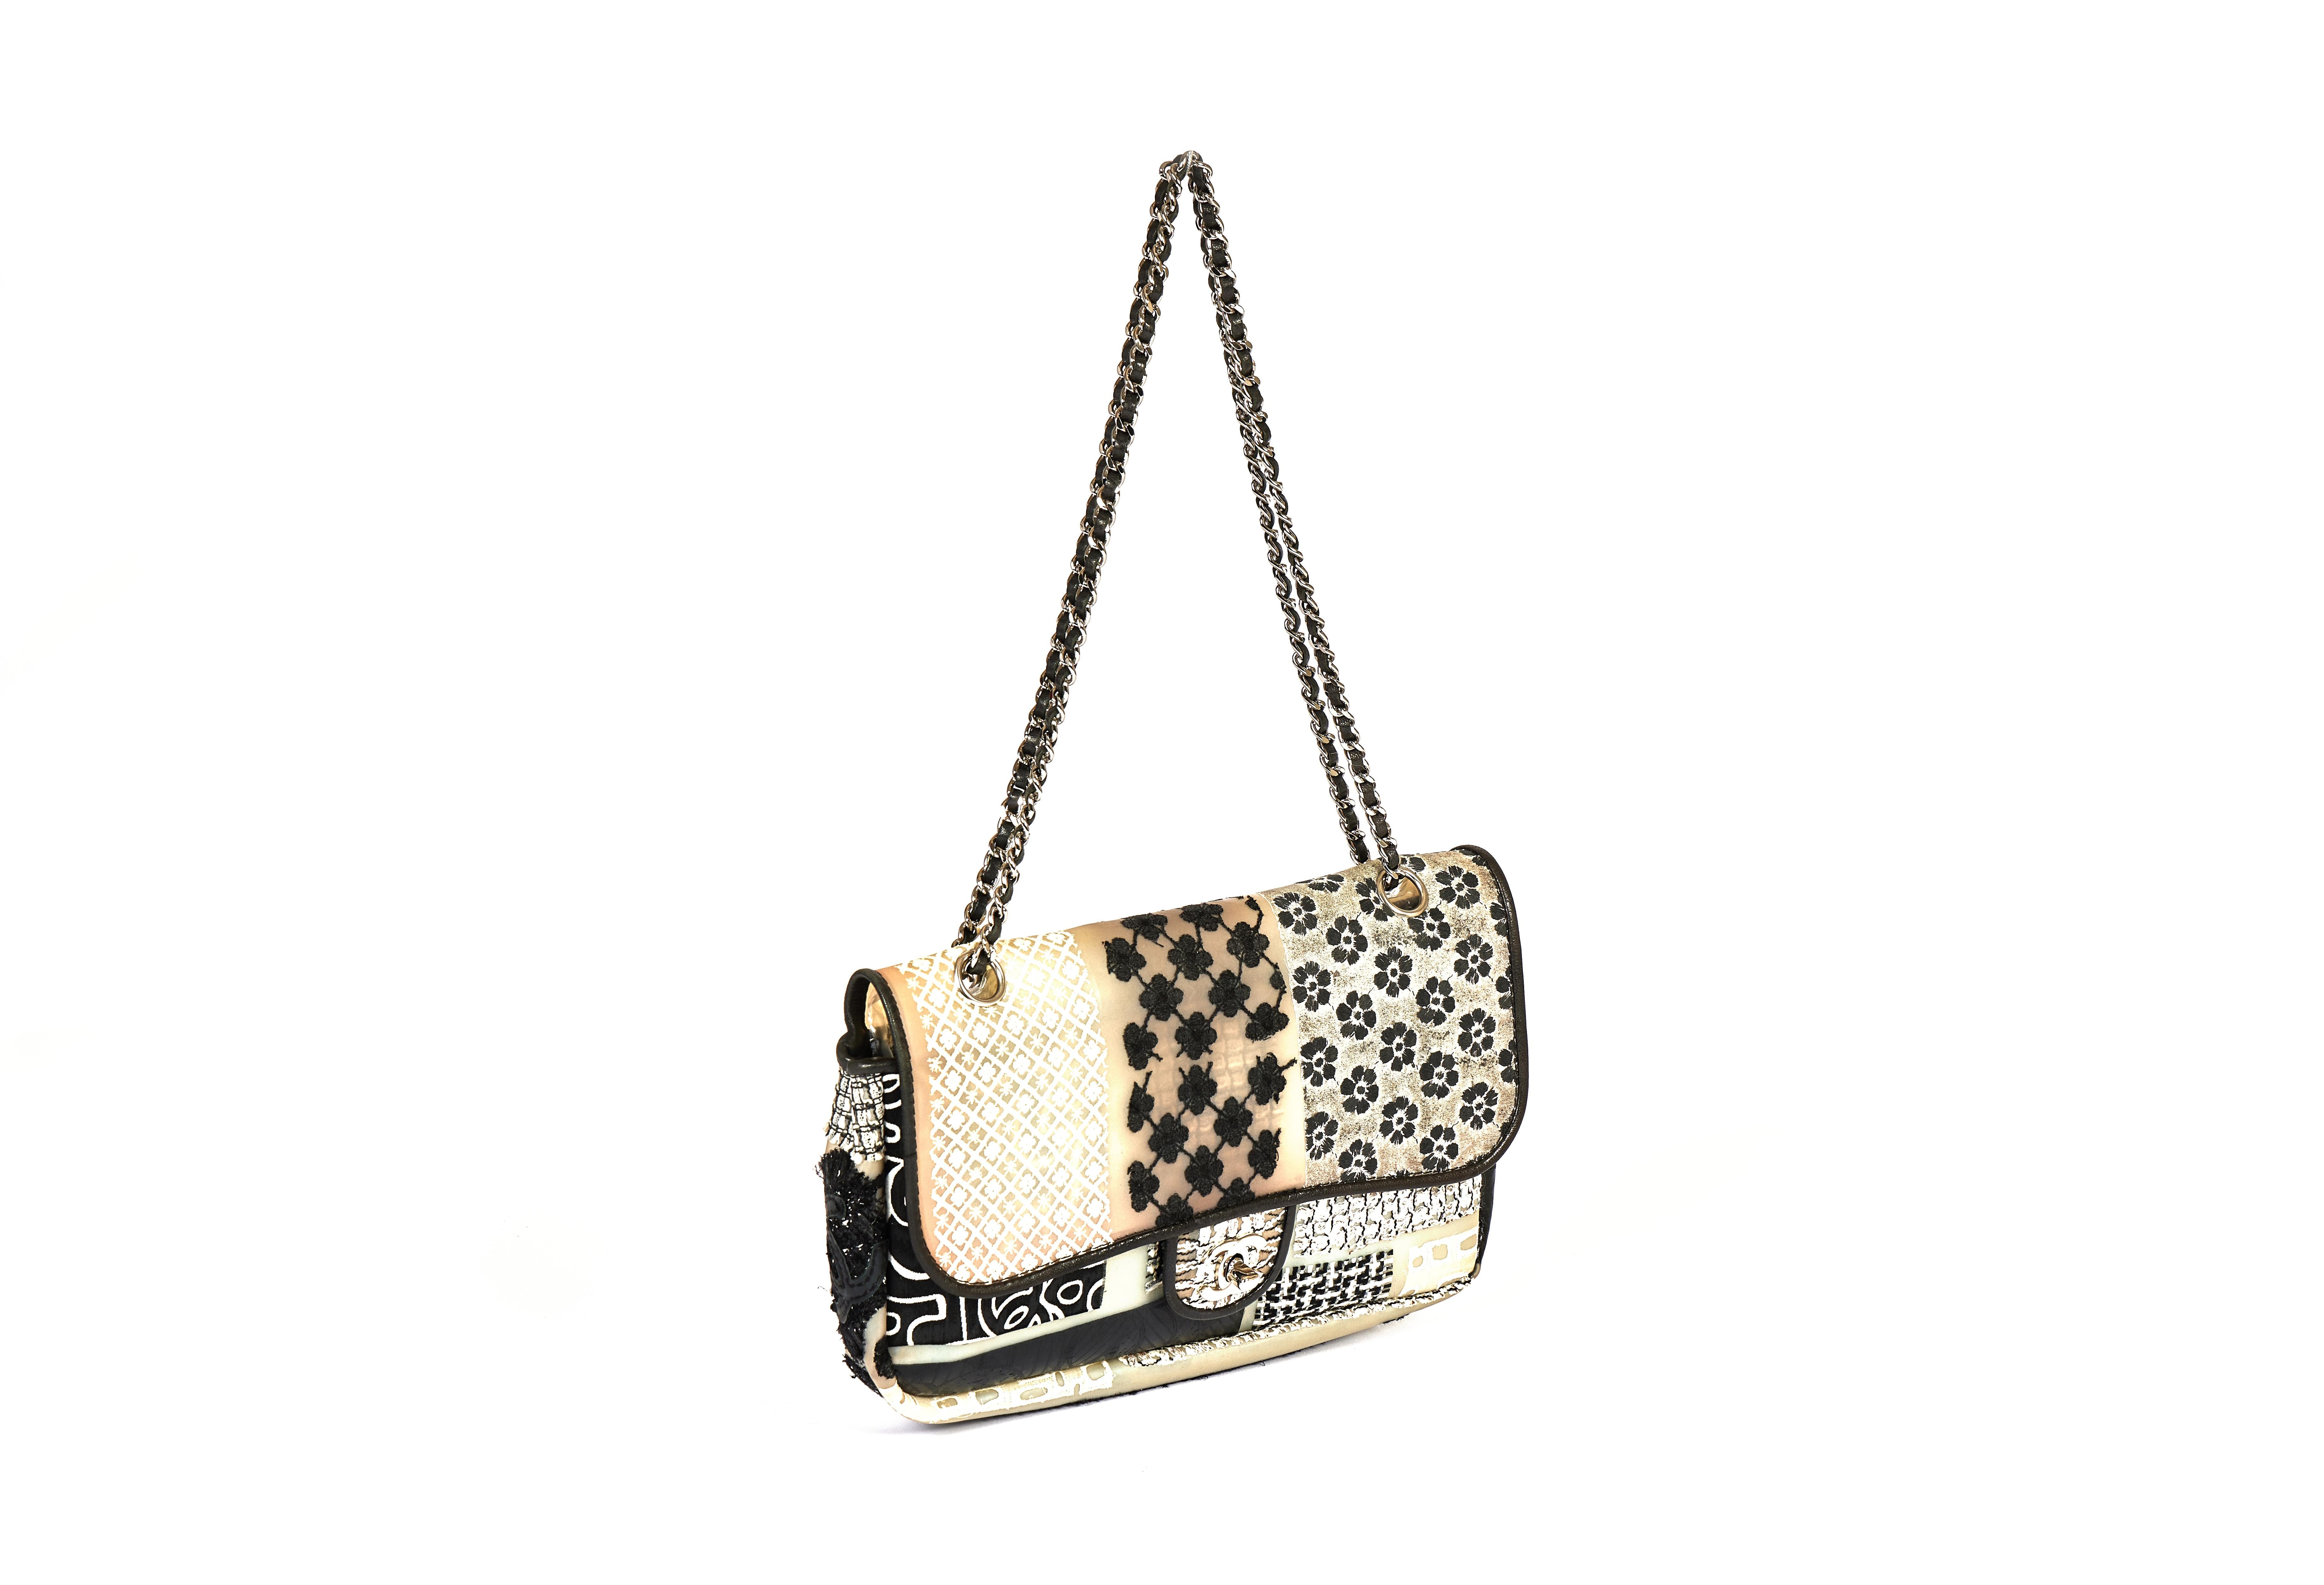 This single flip Chanel bag is super fun. It's made out off PVC and has different floral patterns which are stitched into the material. It is trimmed by lambskin leather and comes with a silver chain. The shoulder drop is 10 inches and you can also